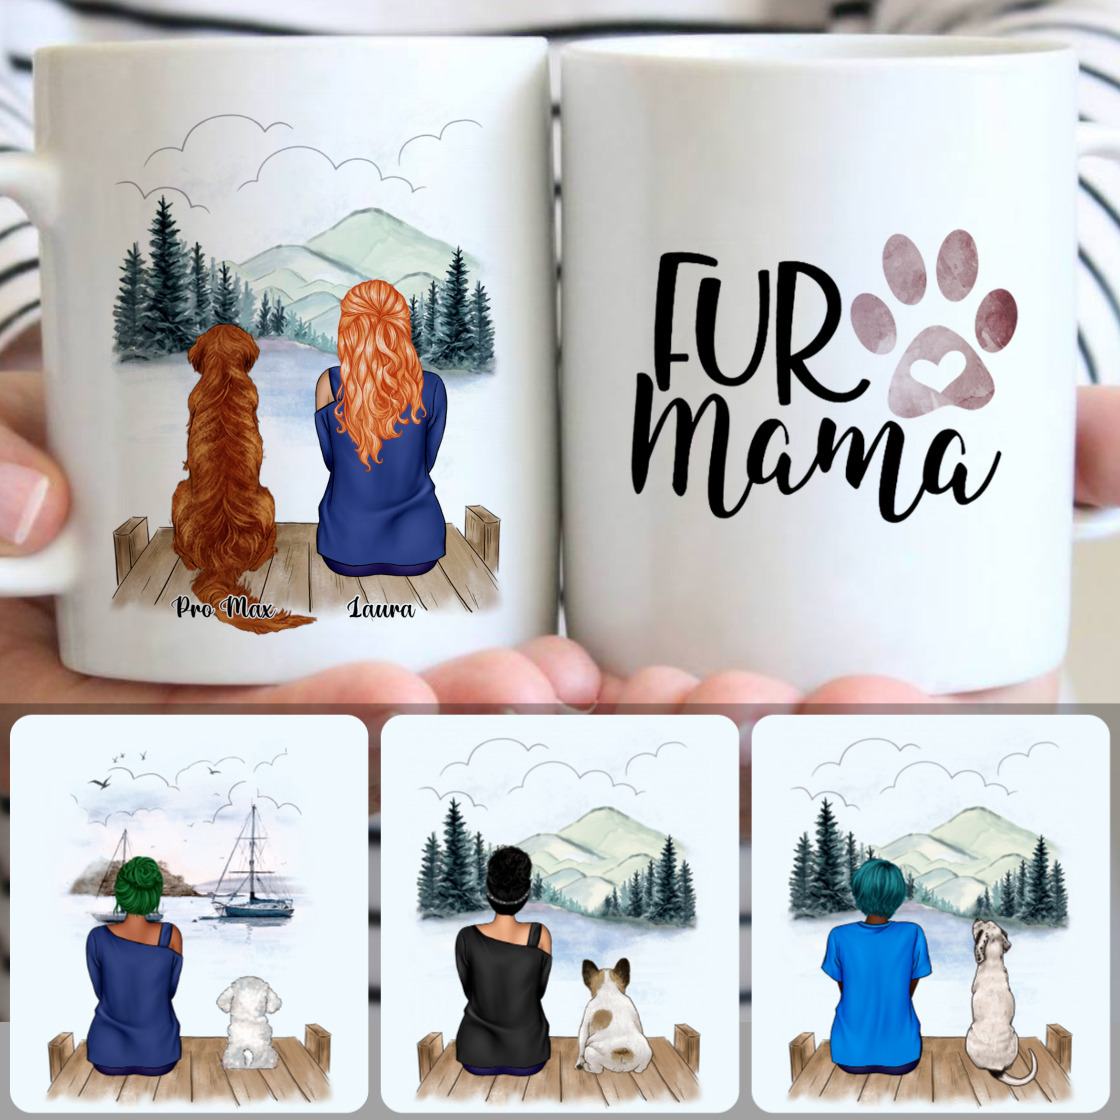 Personalized Mug, Meaningful Gifts For Mother In Law, Girl & Dog Customized Coffee Mug With Names